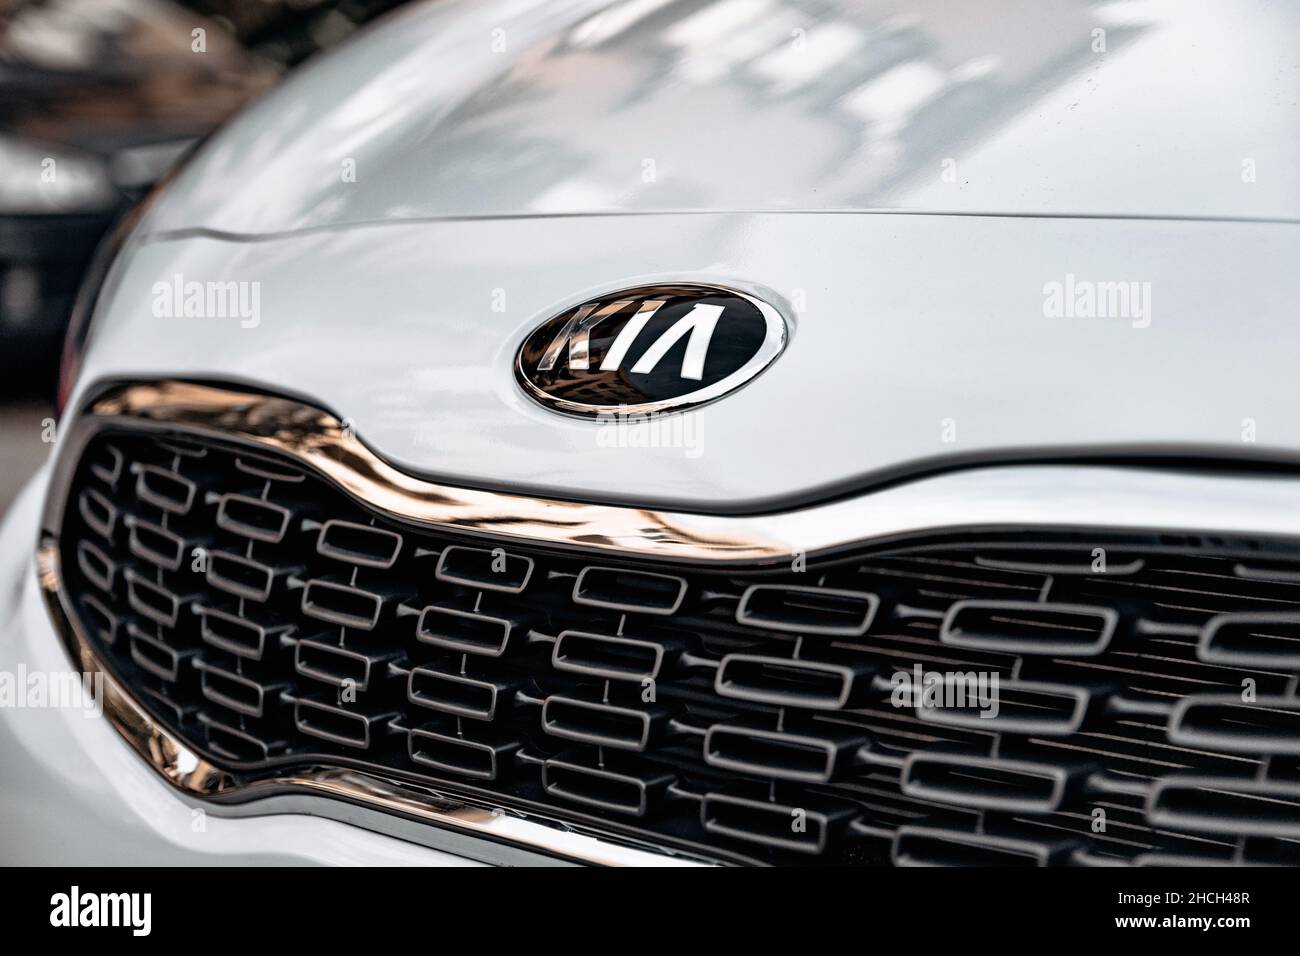 Textured grille with chrome trim and KIA logo on front of white car. Stock Photo